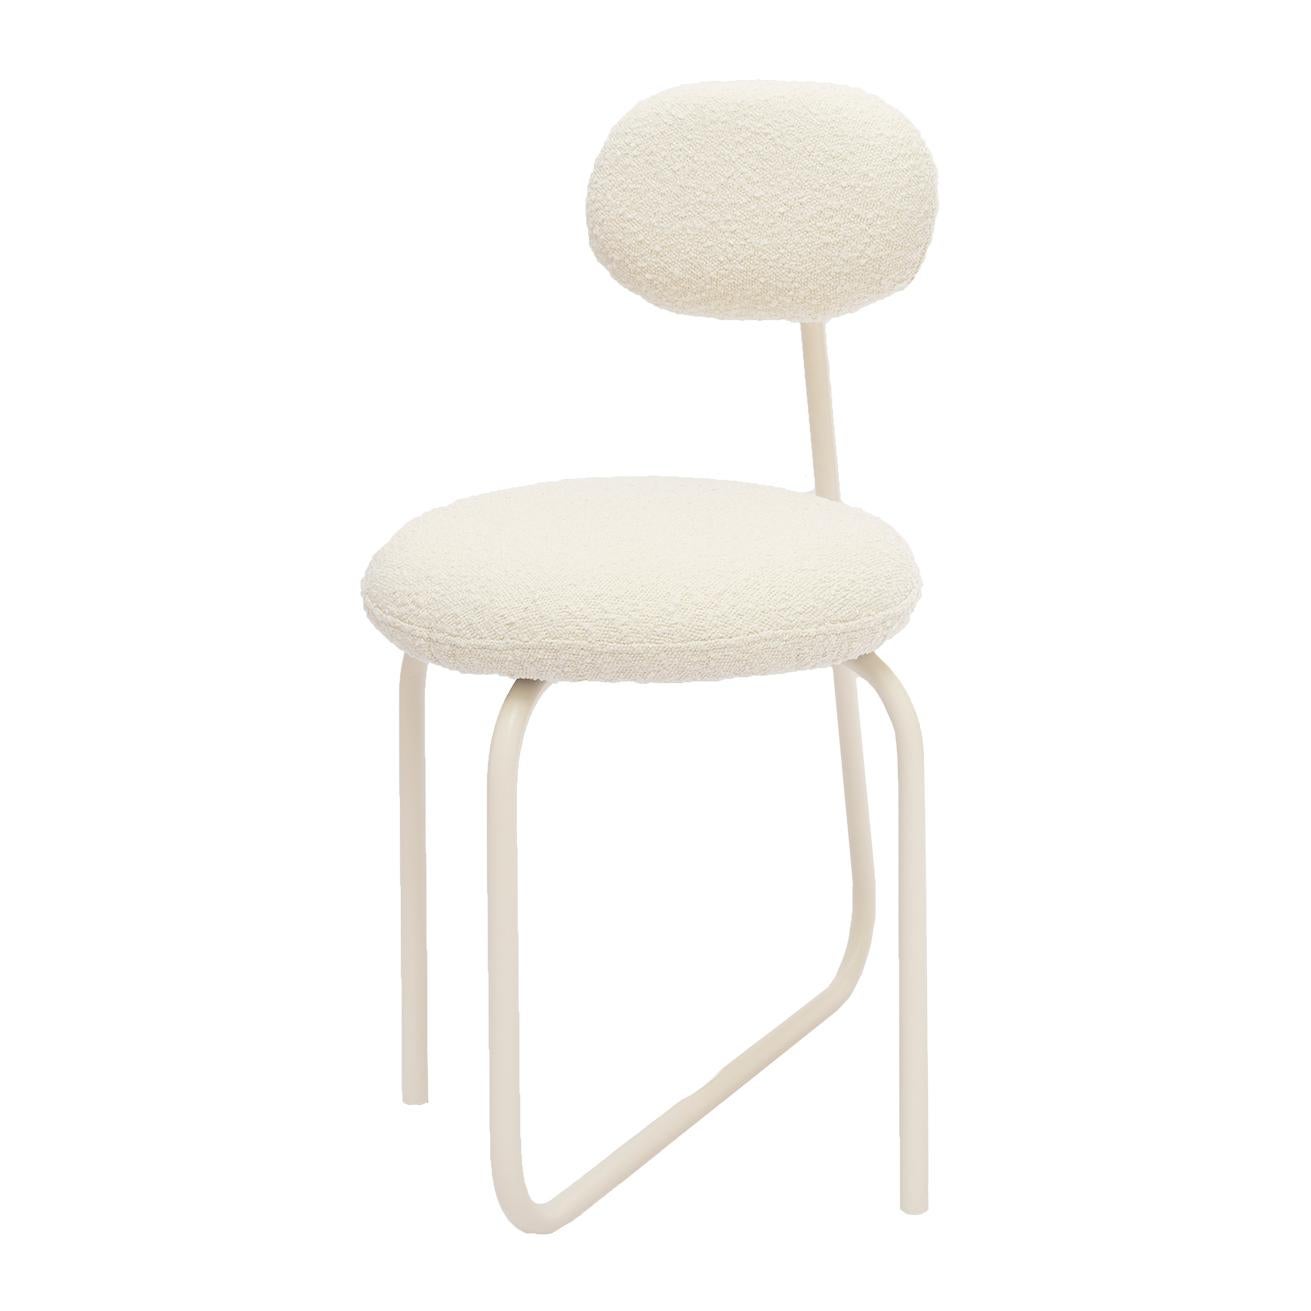 Object 101 Chair by NG Design
Dimensions: W 50 x D 60 x H 84 cm
Materials: Powder Coated Steel, Bouclé Fabric

Also Available: All of objects available in different materials and colors on demand.

The Object 101 Chair has a characteristically